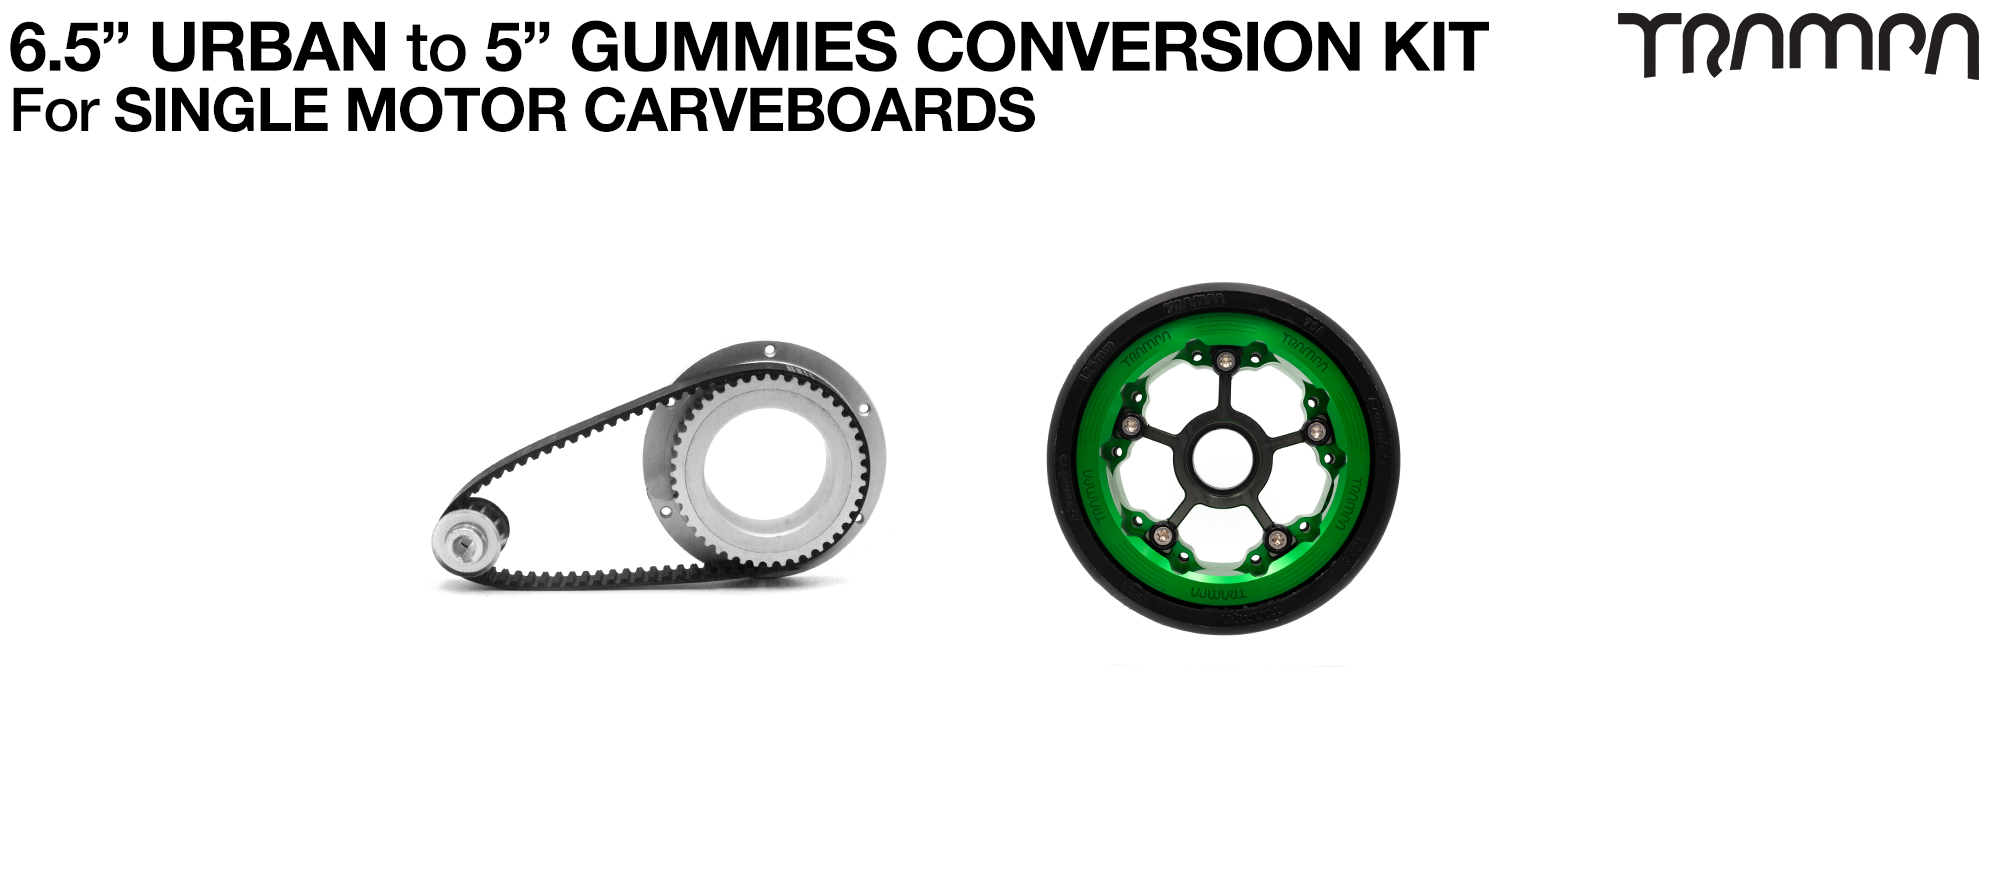 URBAN to GUMMIES Carveboard Complete Conversion kit with 2x 44 Tooth Pulley Kits 4x 7 Inch Custom wheels for SINGLE Motor Mounts  